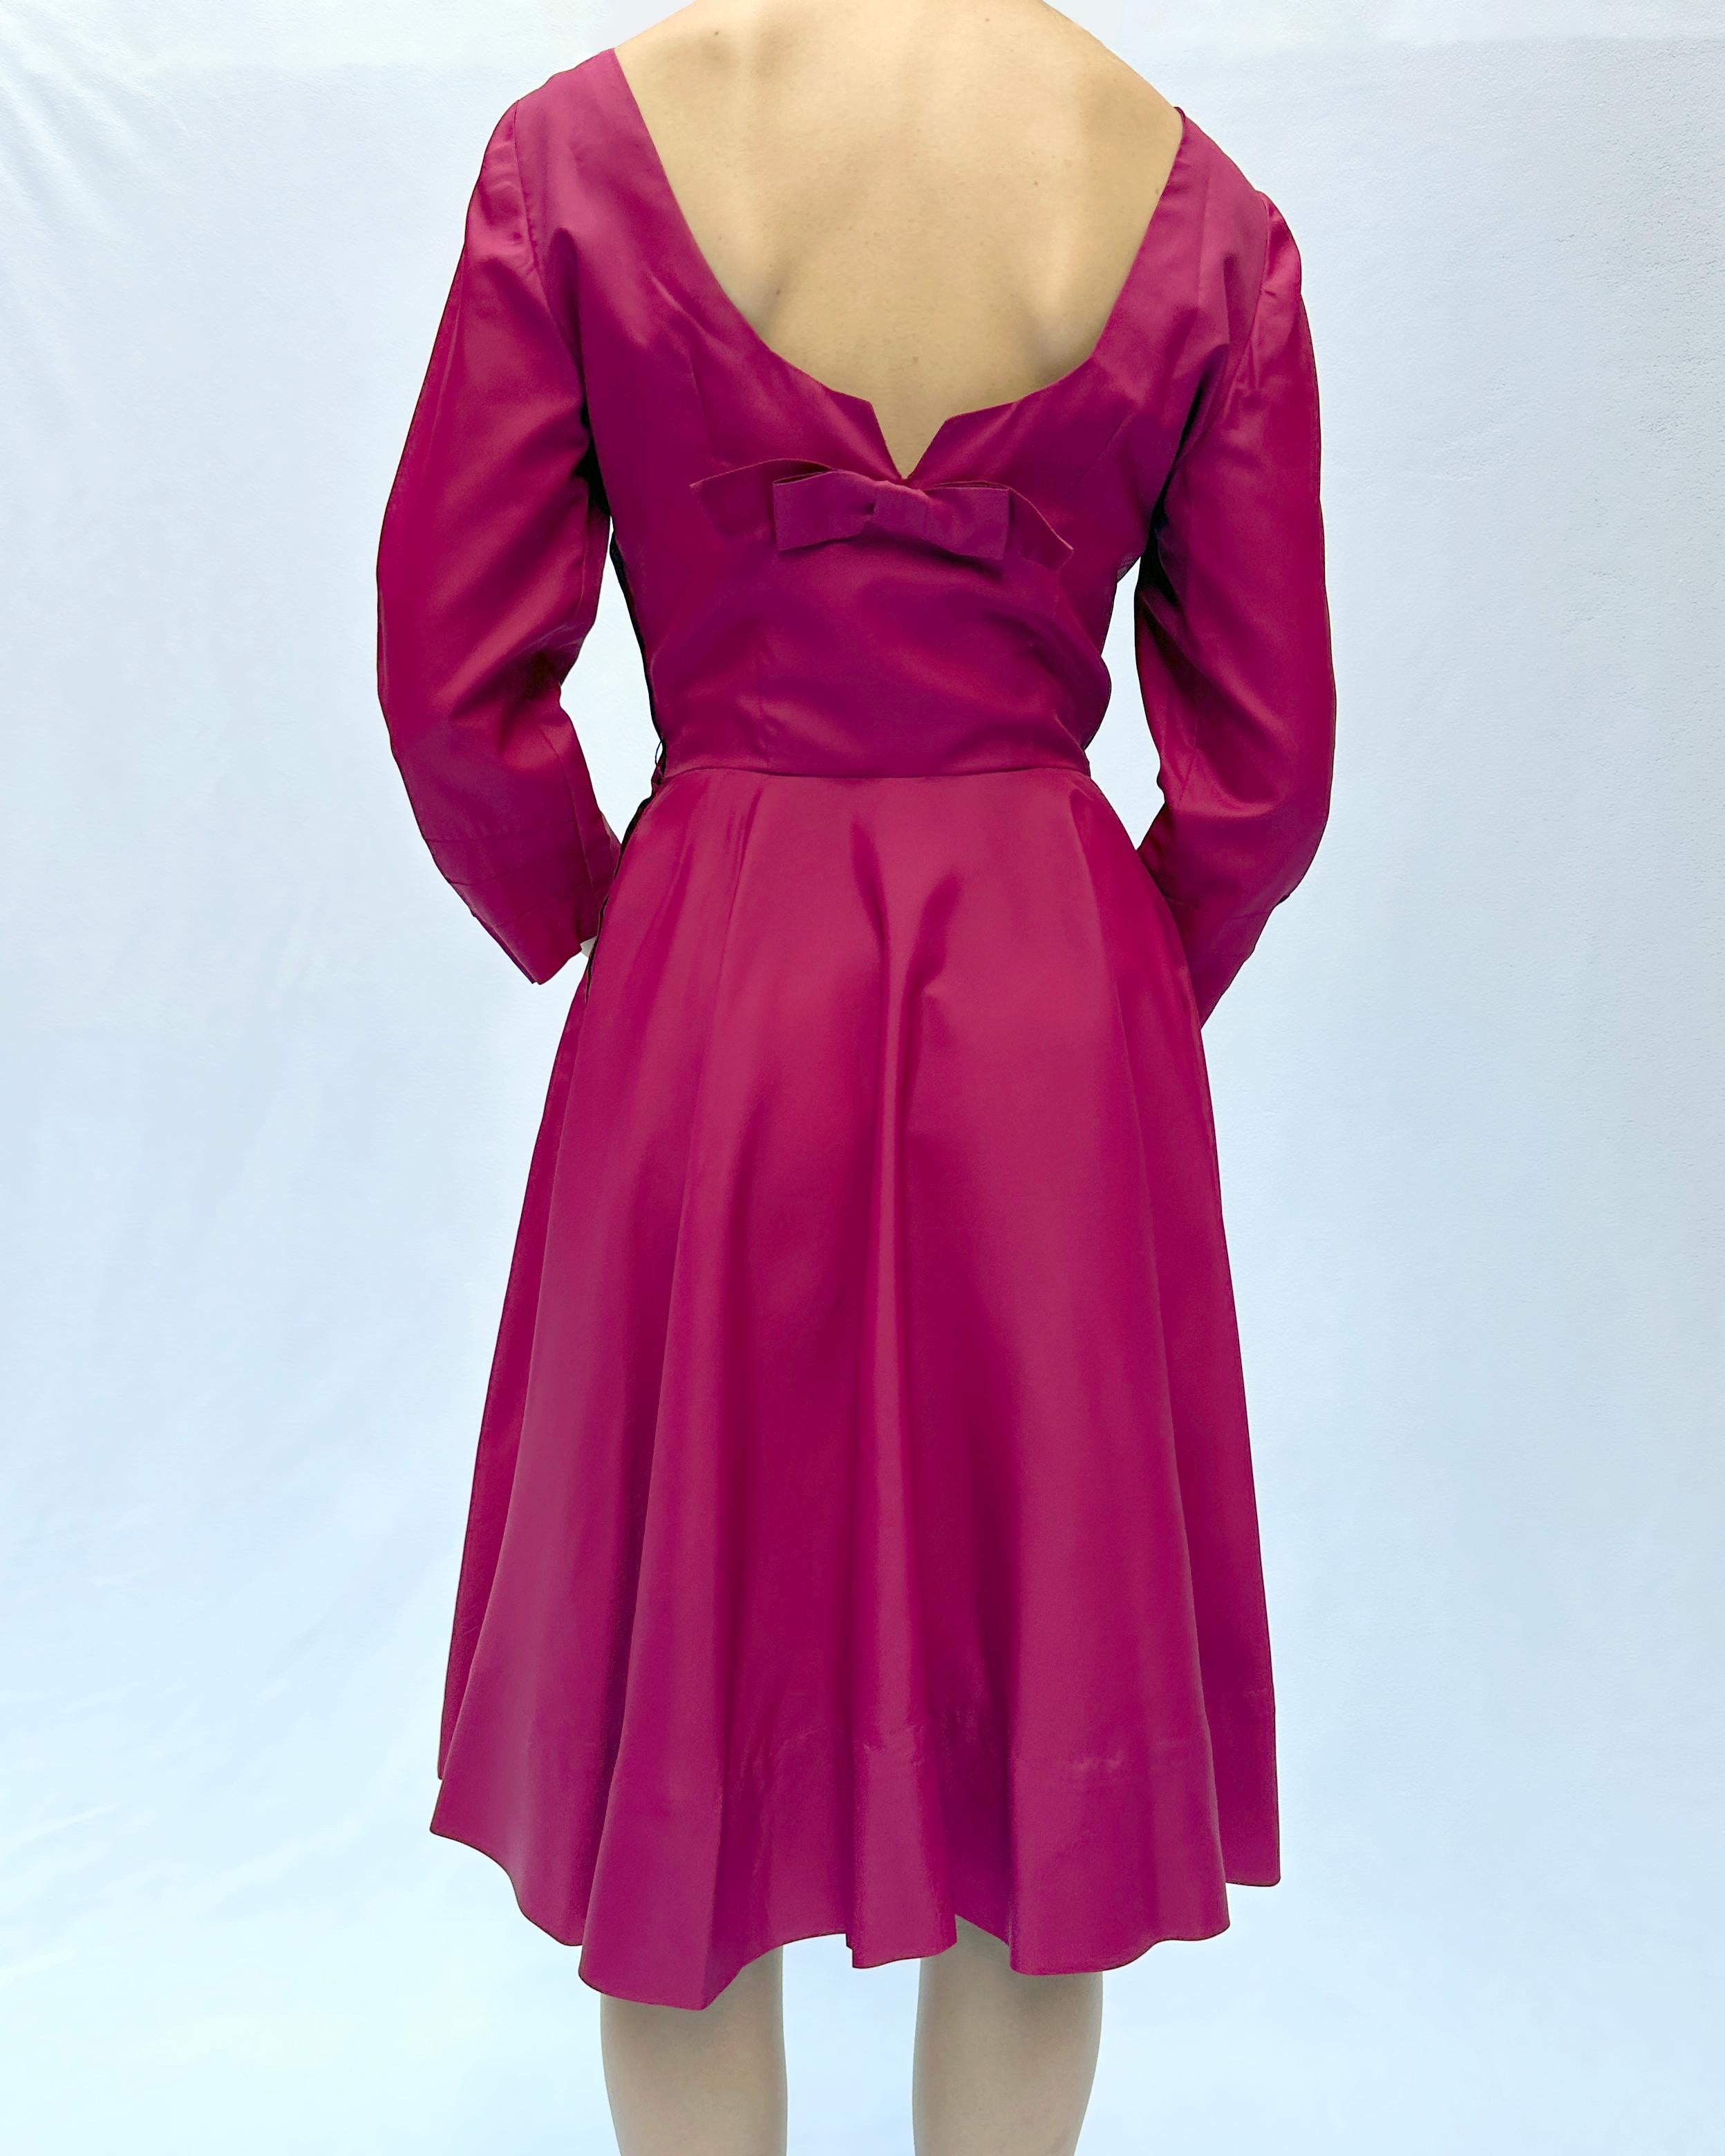 VINTAGE 1950s FIT AND FLARE DRESS For Sale 4